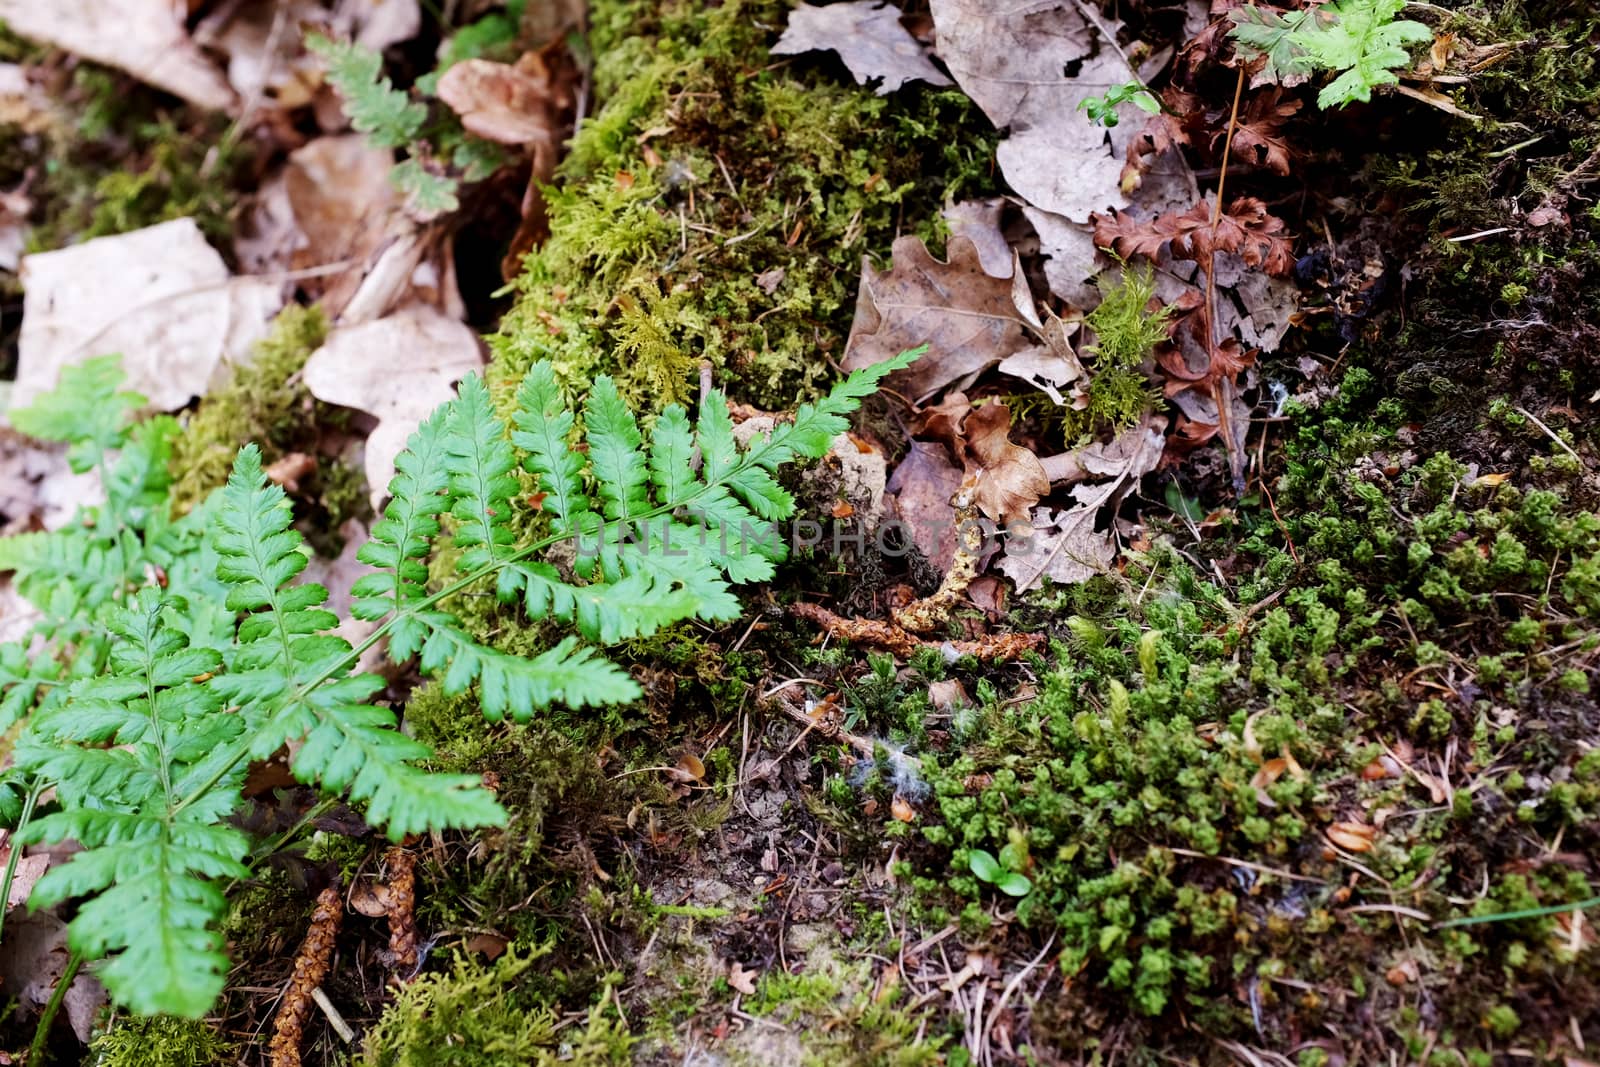 Green bracken leaves among moss and dry leaves by sarahdoow